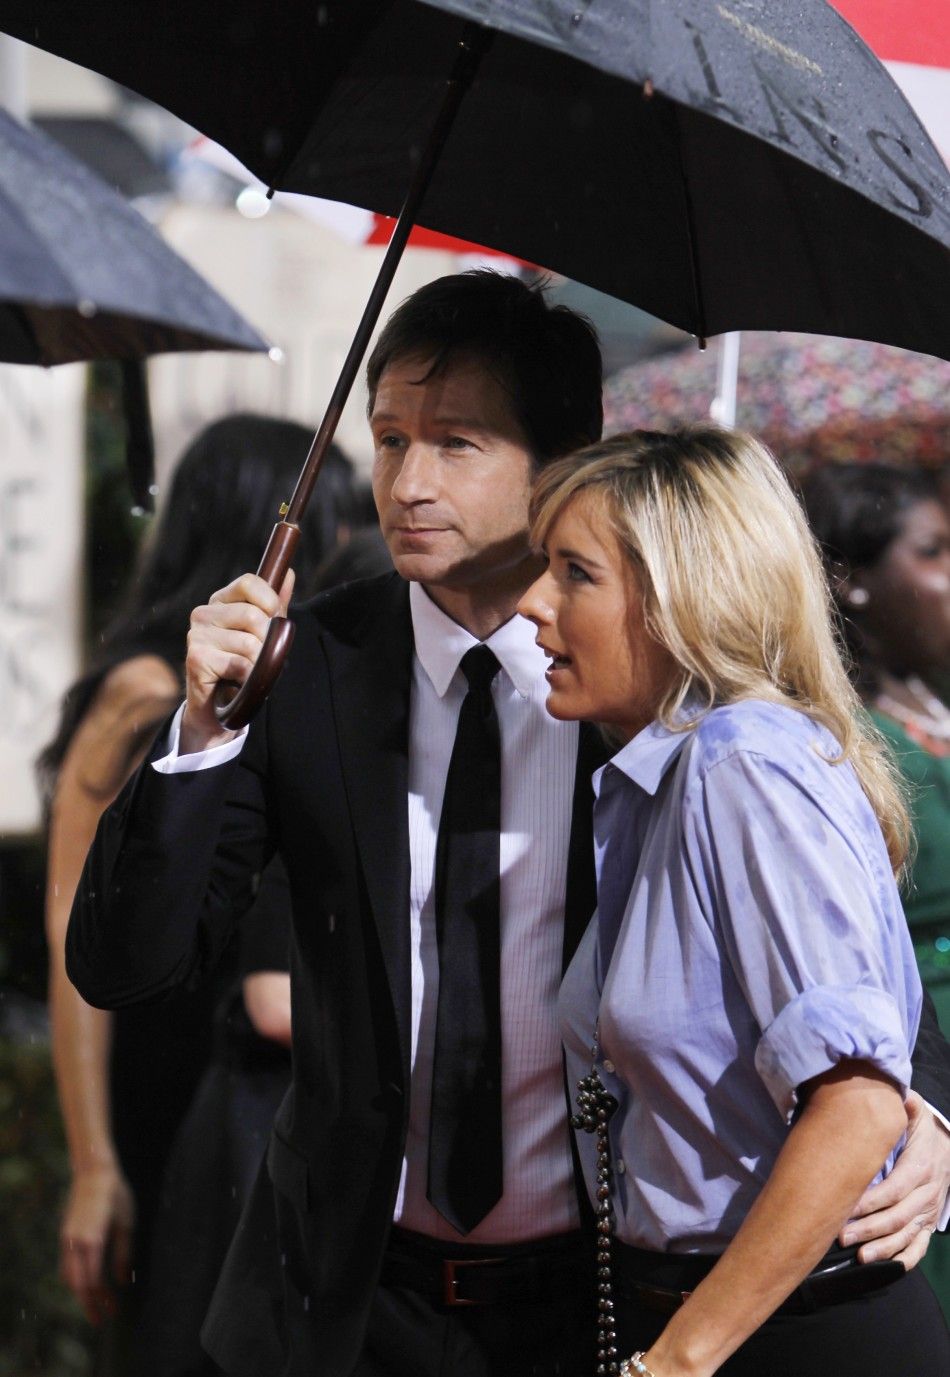 Actress Tea Leoni R and husband David Duchovny arrive at the 67th annual Golden Globe Awards in Beverly Hills, California January 17, 2010.